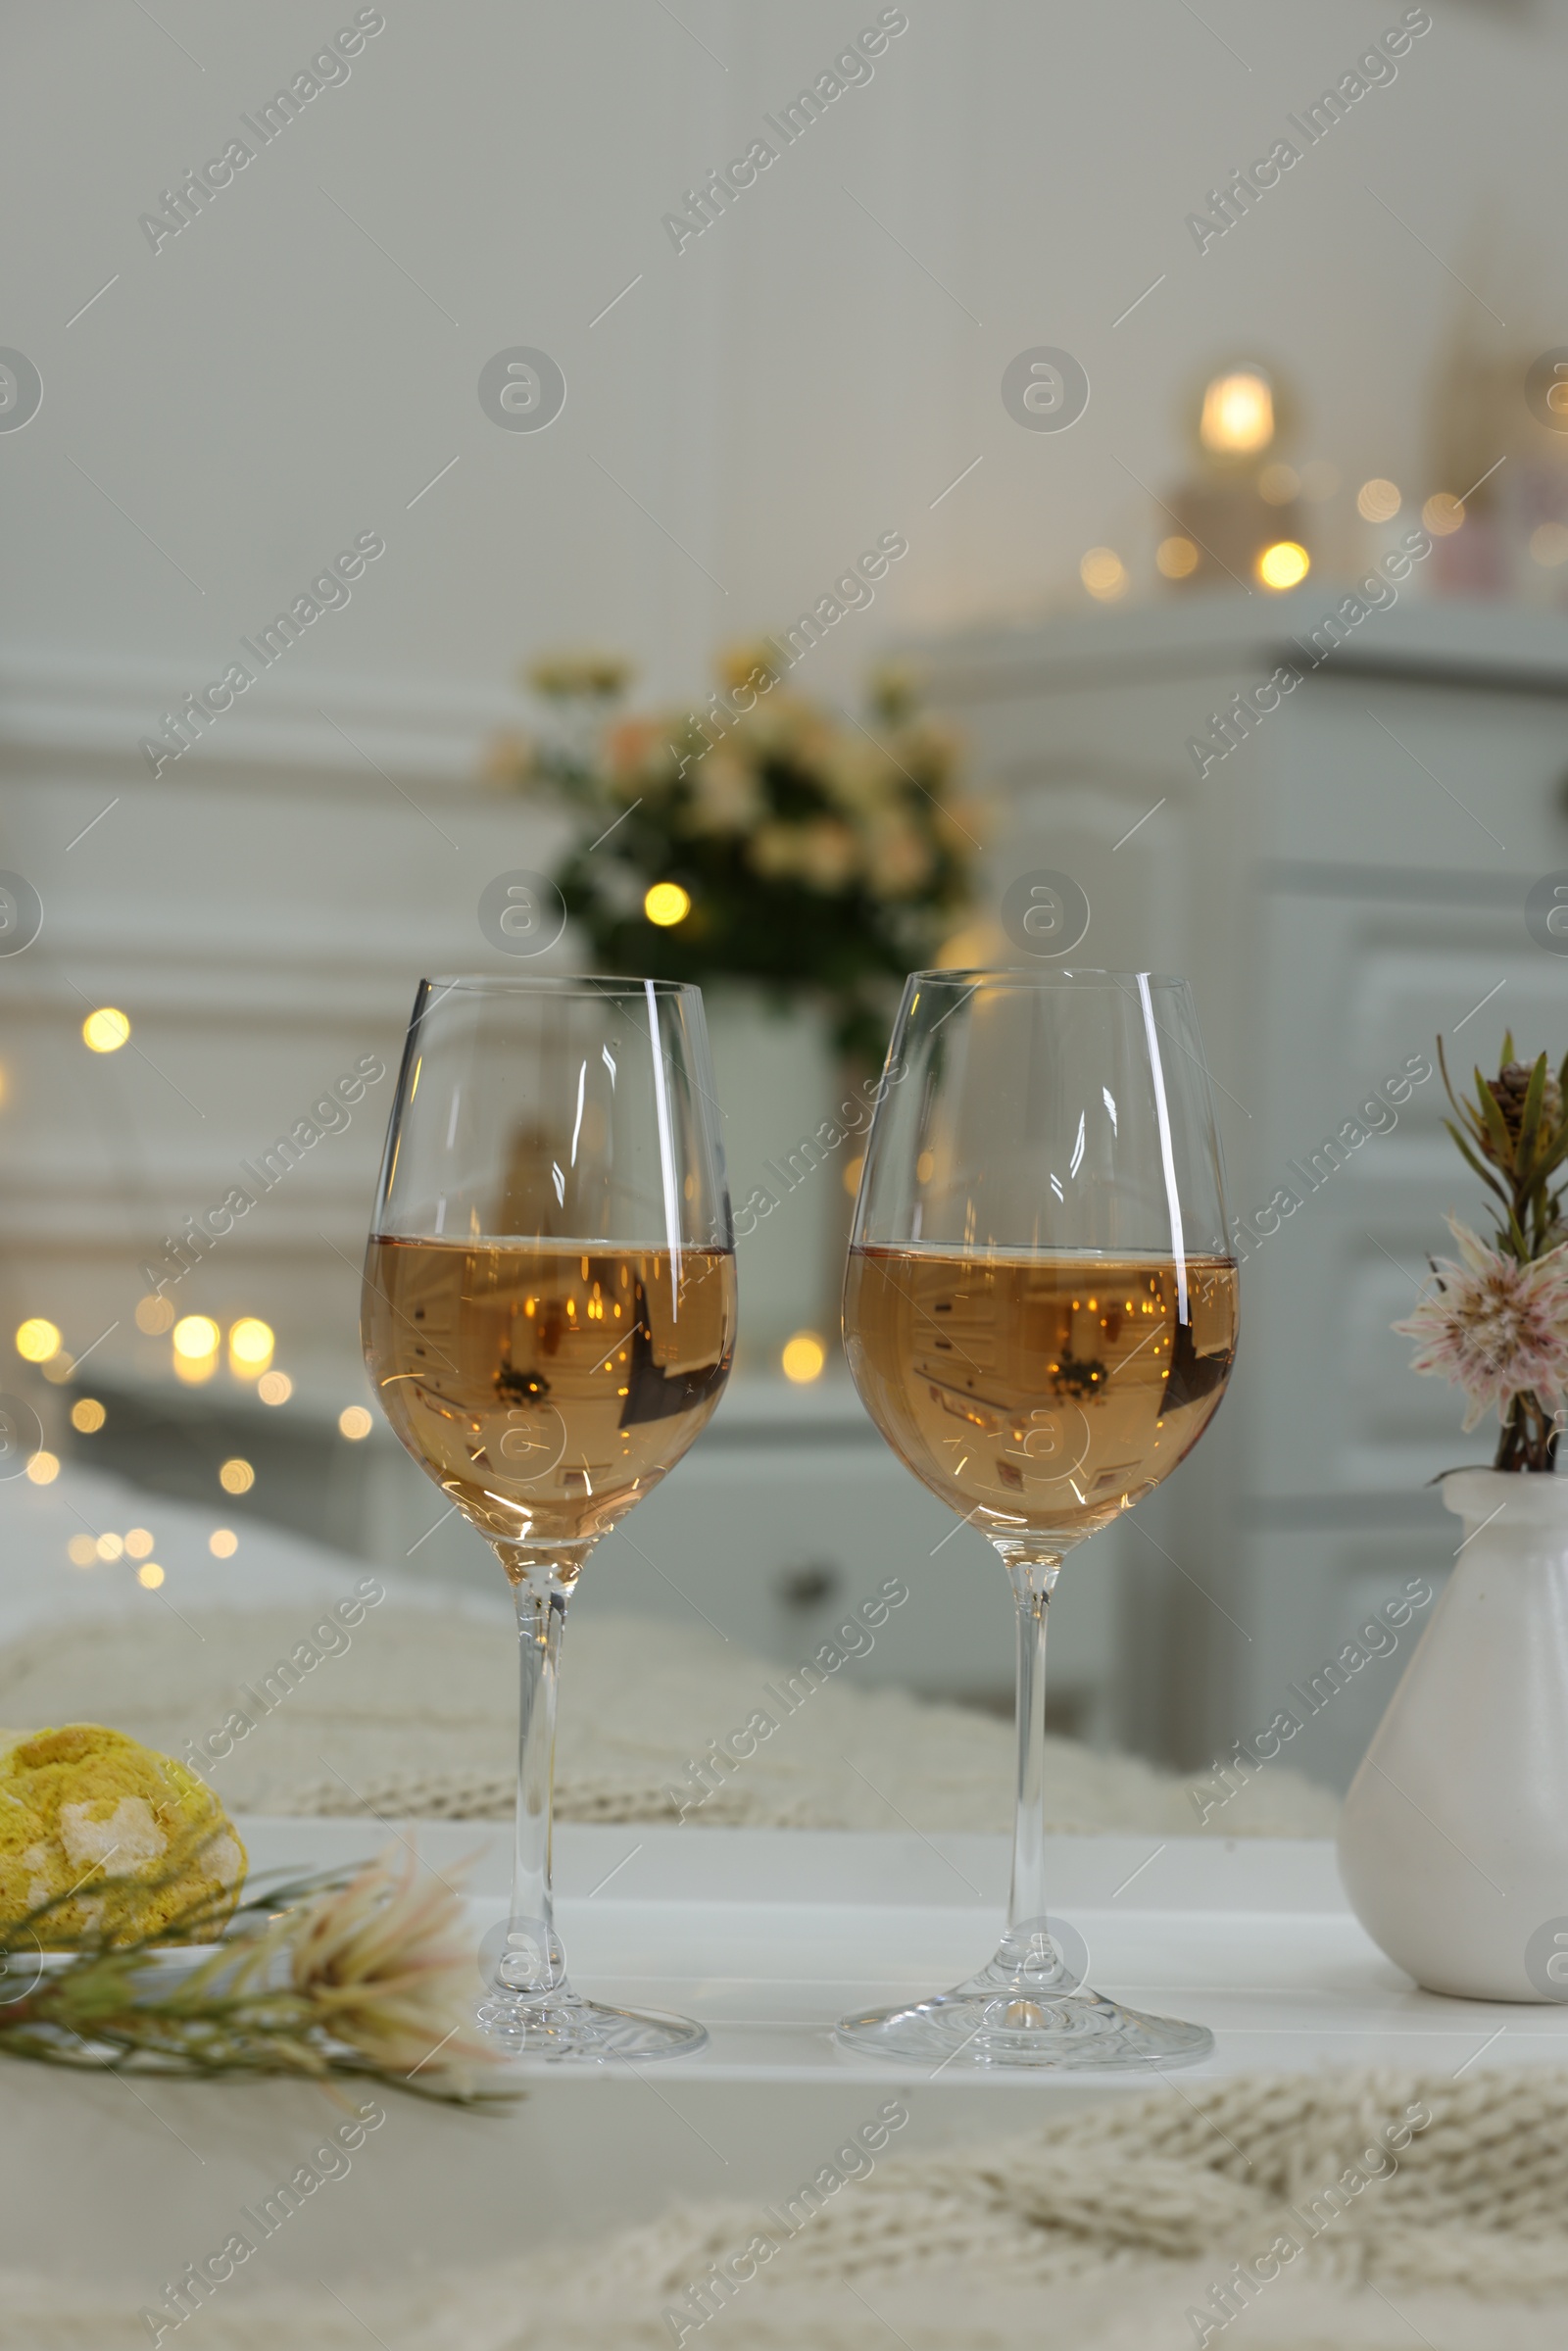 Photo of Tray with glasses of wine in bedroom adorned for romantic date